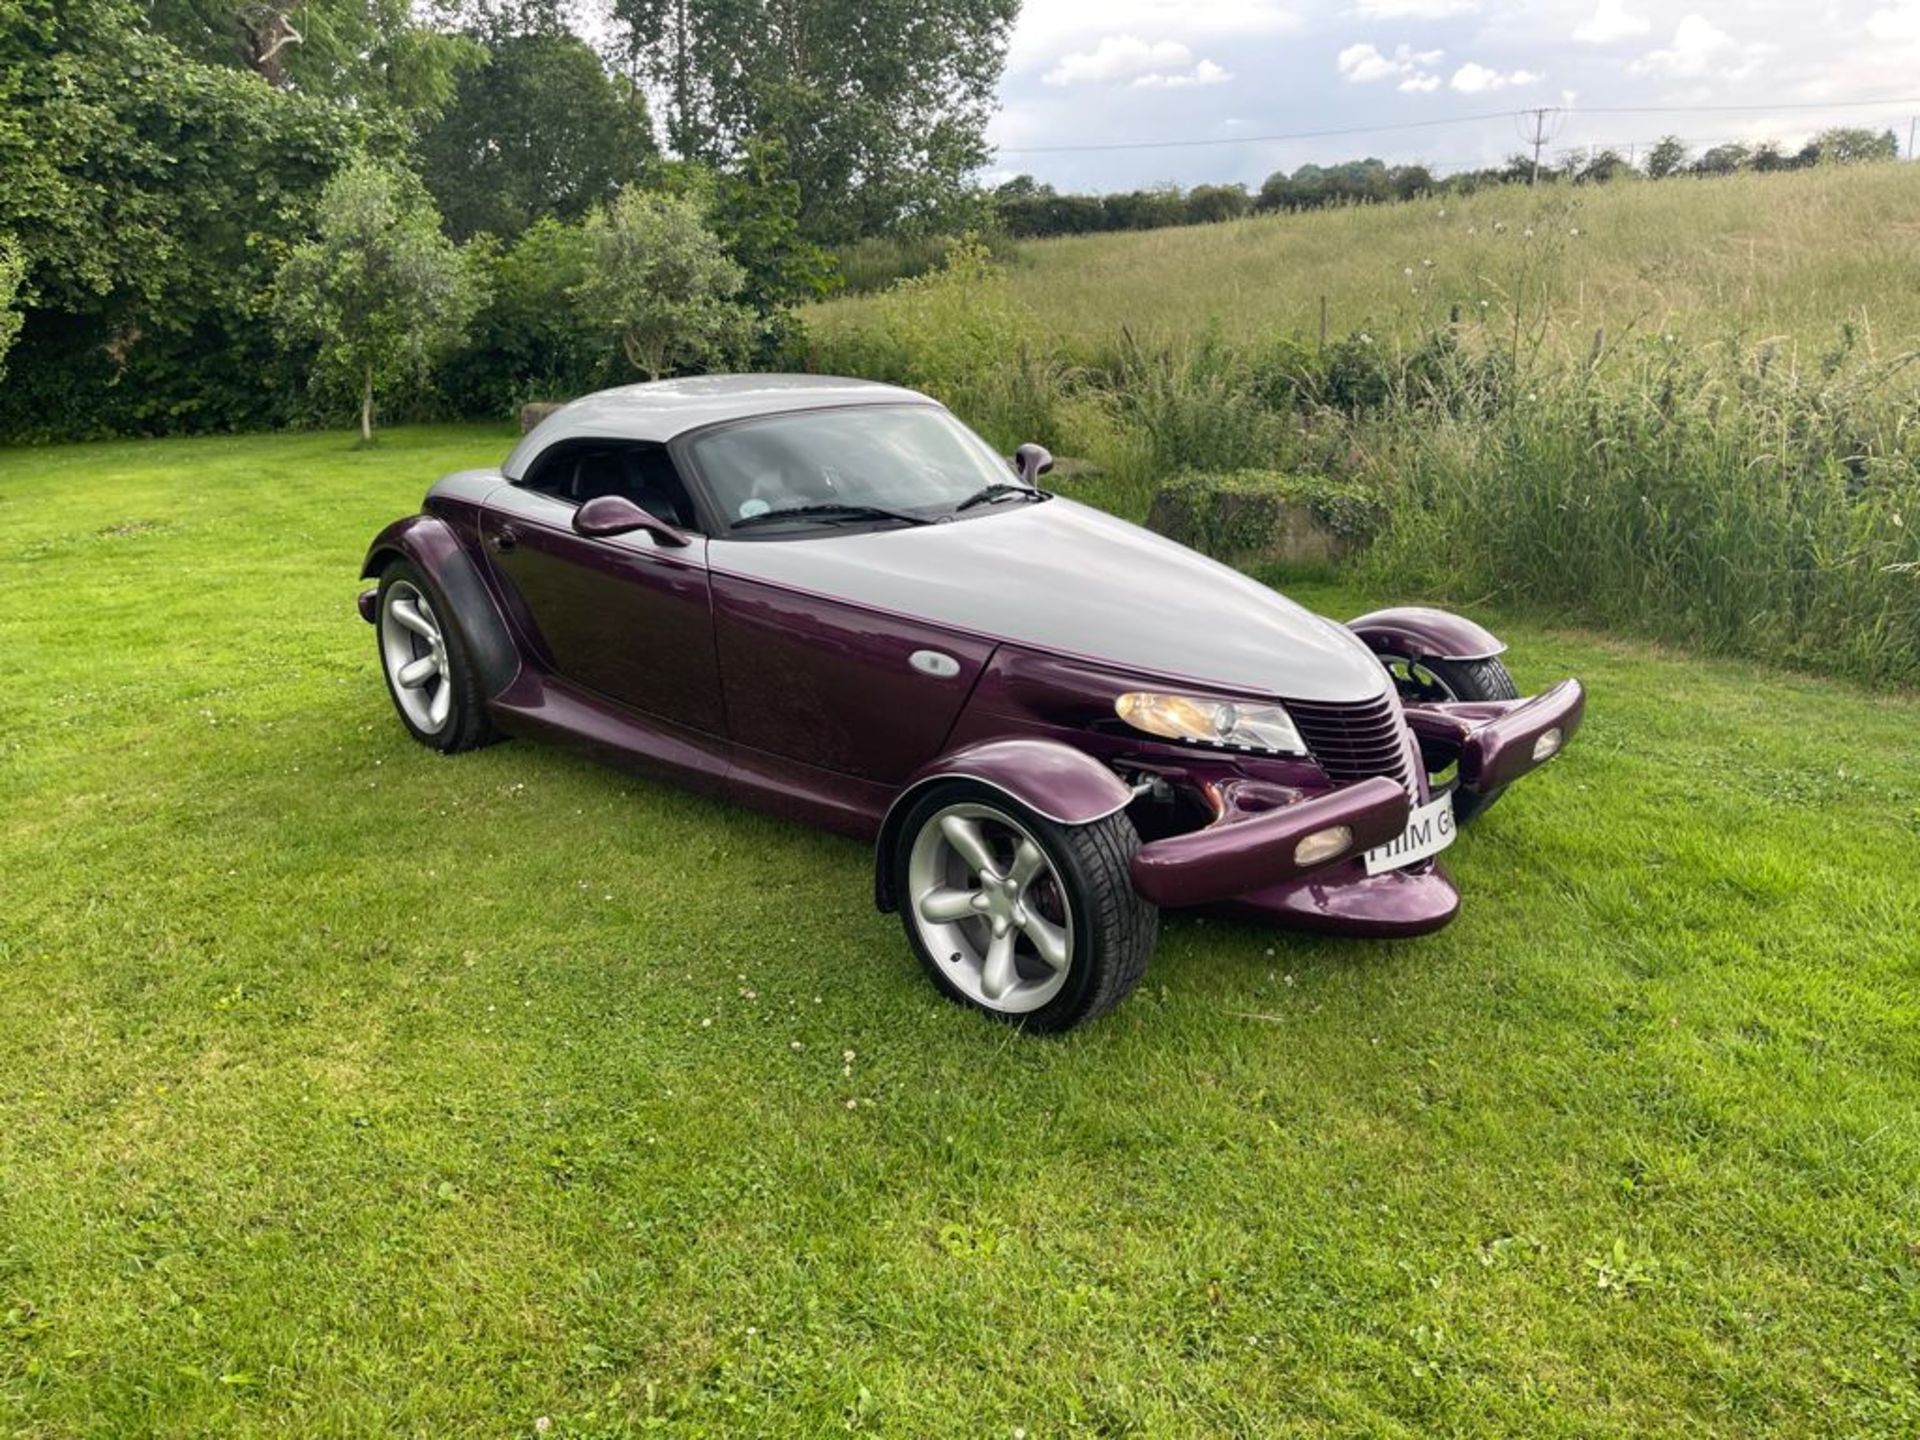 1998 CHRYSLER PLYMOUTH PROWLER V6 2 DOOR CONVERTIBLE, 3500cc PETROL ENGINE, AUTO *NO VAT* - Image 8 of 27